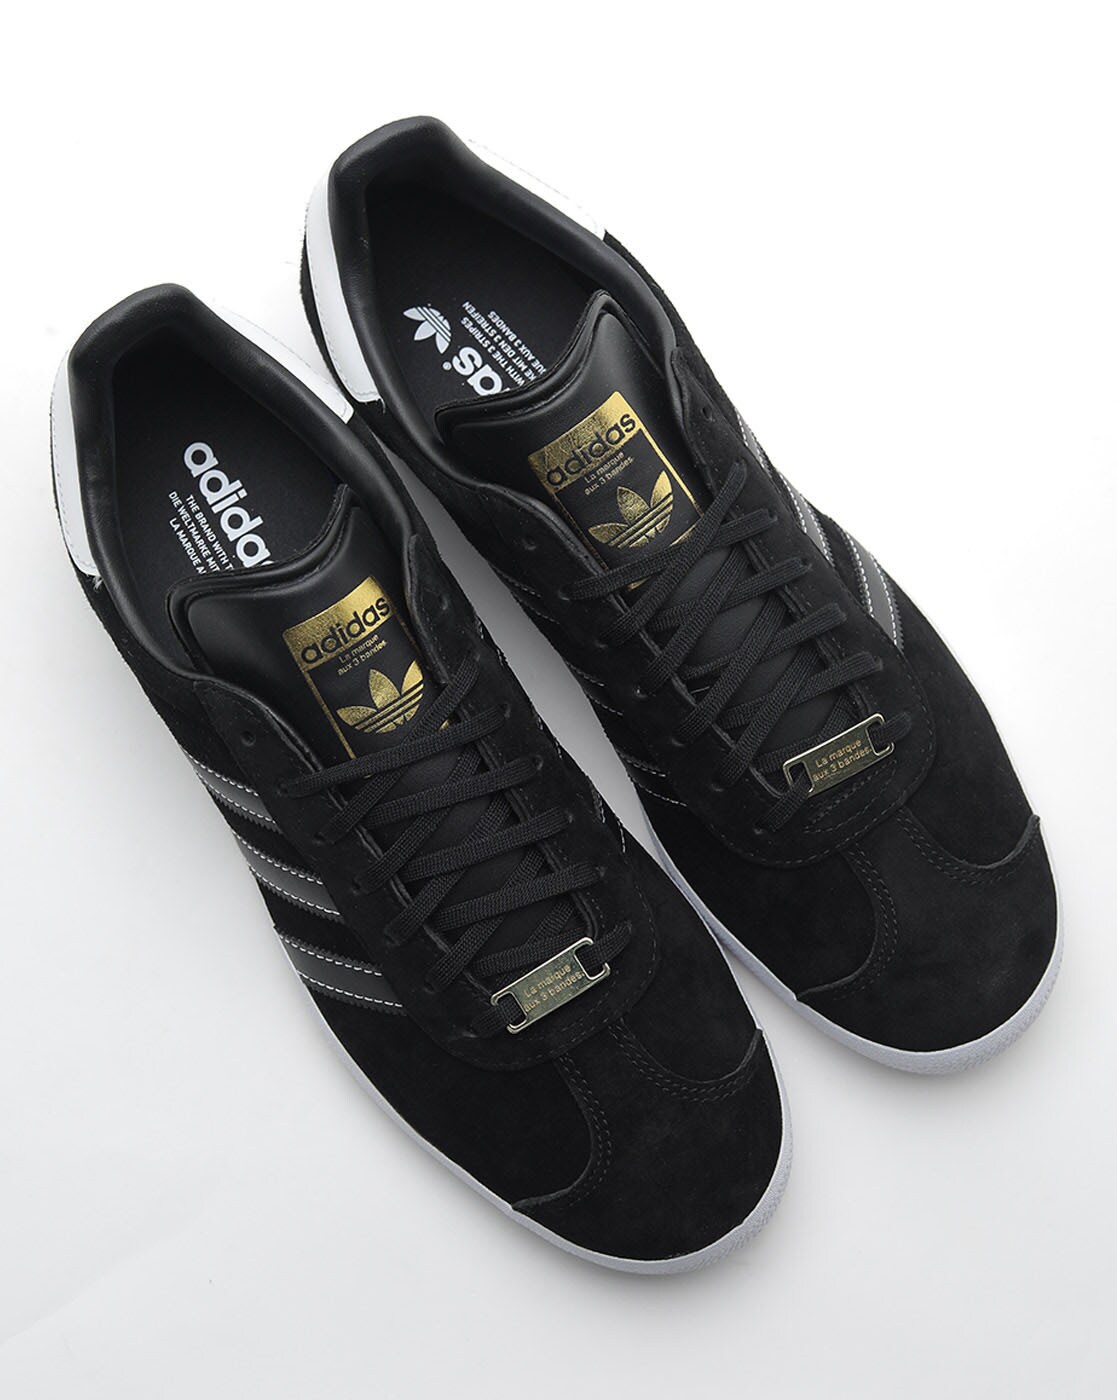 Gazelle Indoor leather-trimmed sneakers in black - Adidas